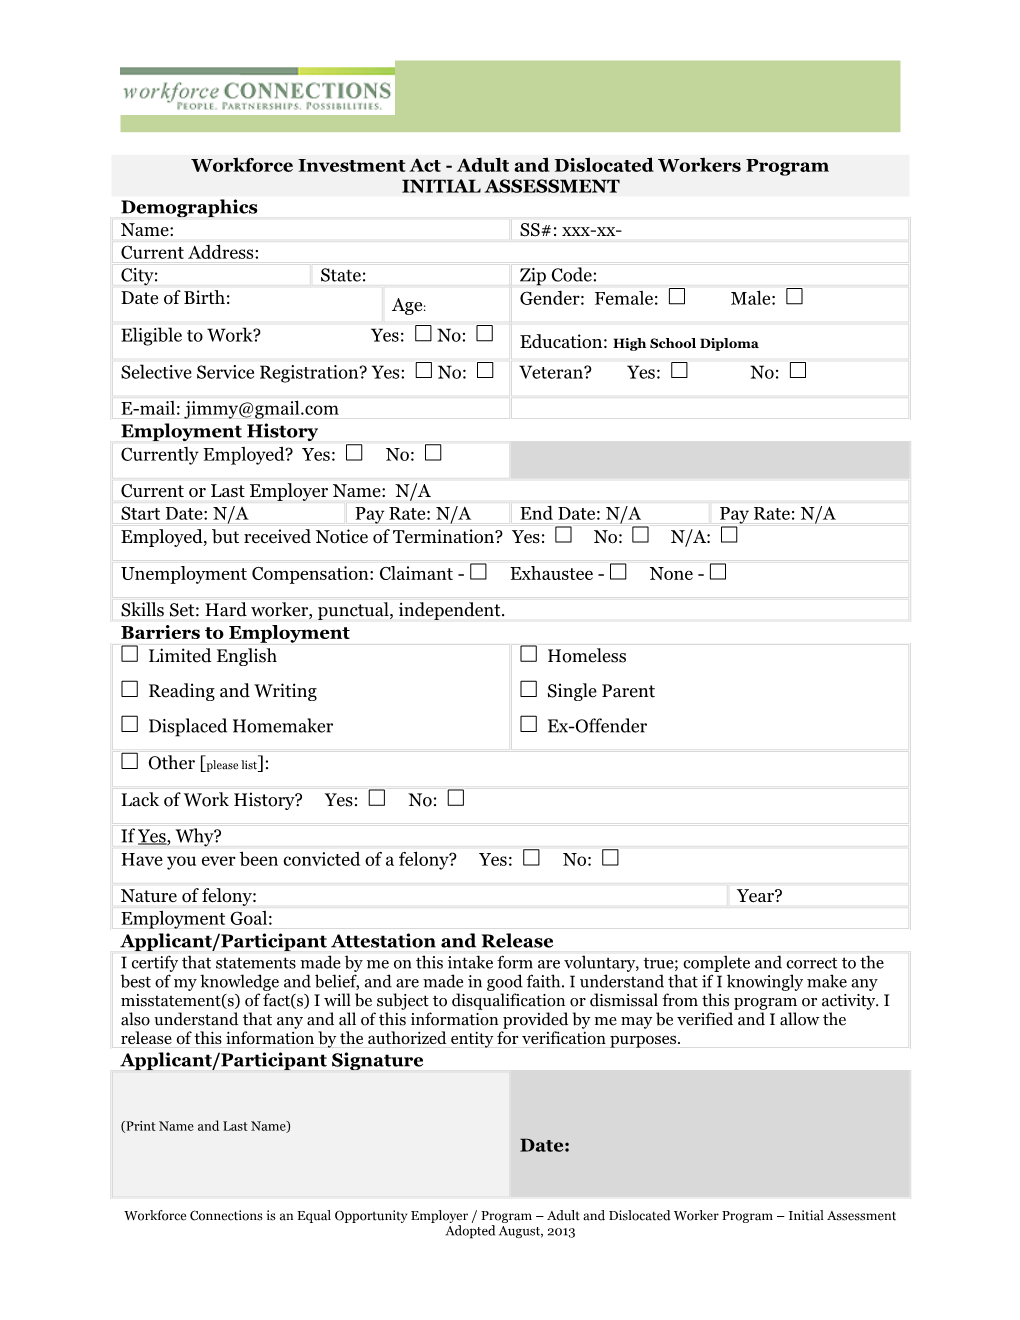 Applicant/Participant Attestation and Release